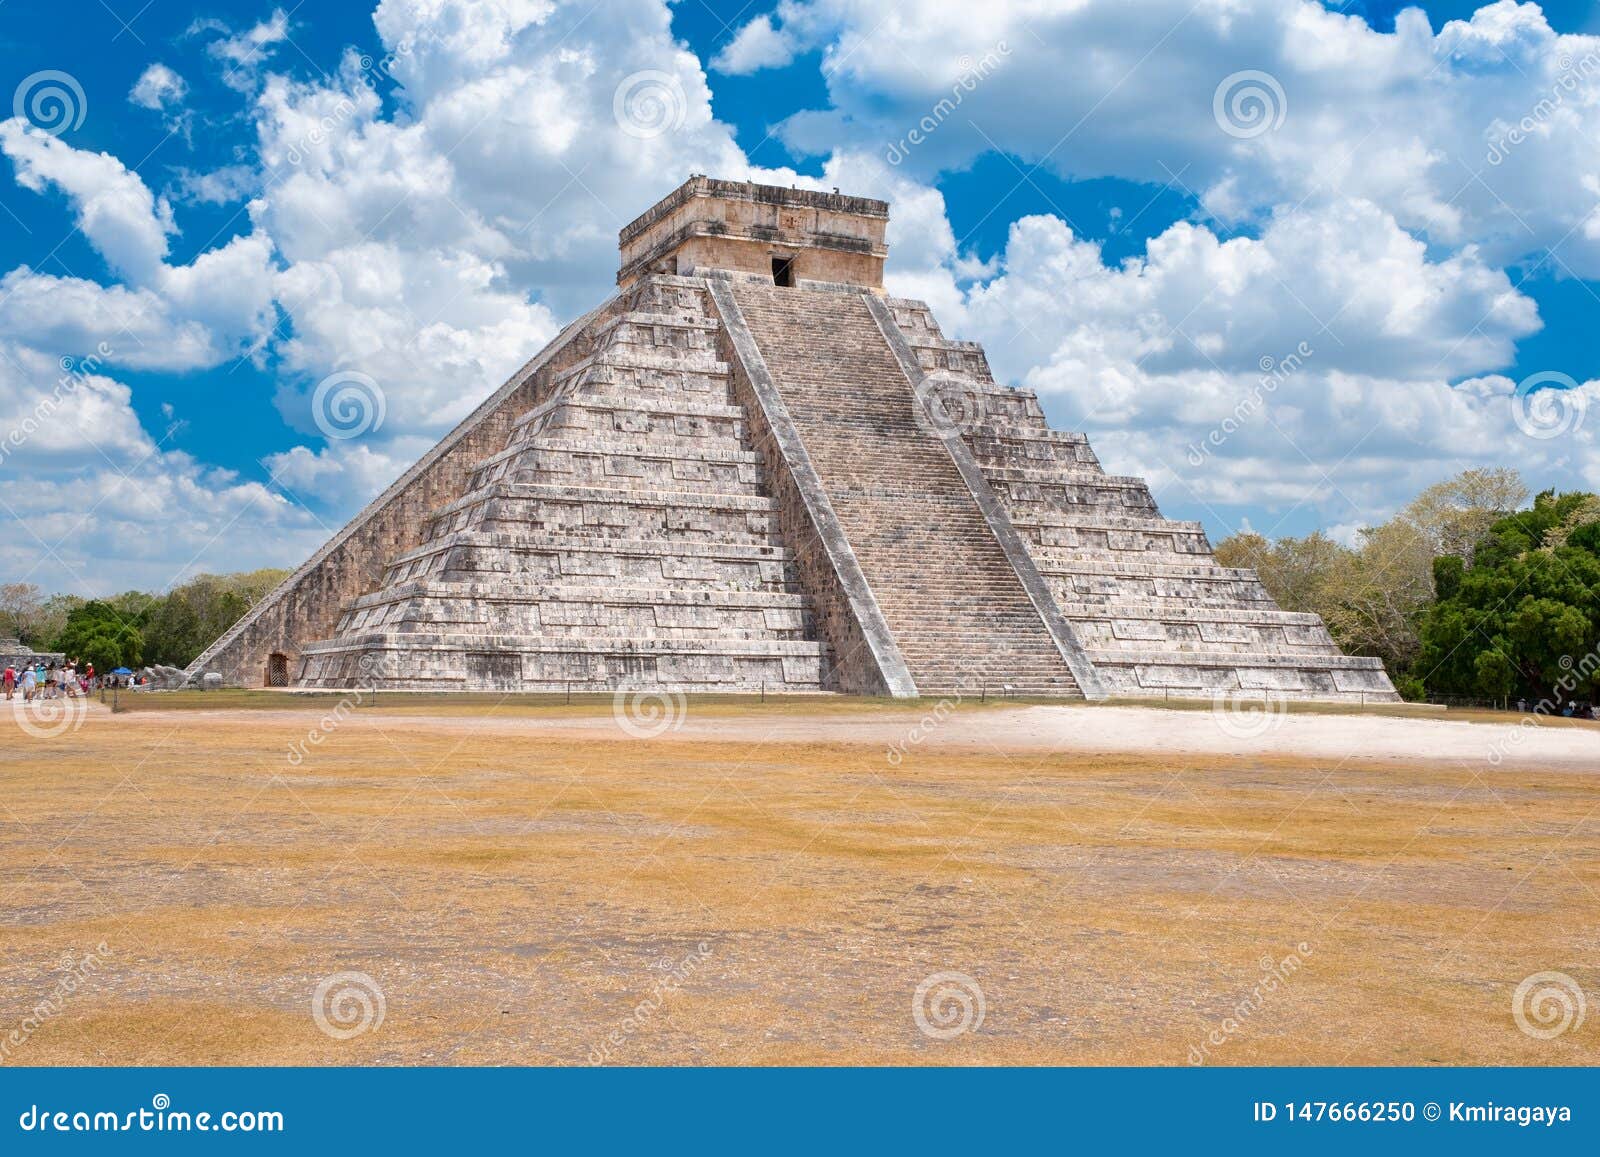 the temple of kukulkan at the ancient mayan city of chichen itza